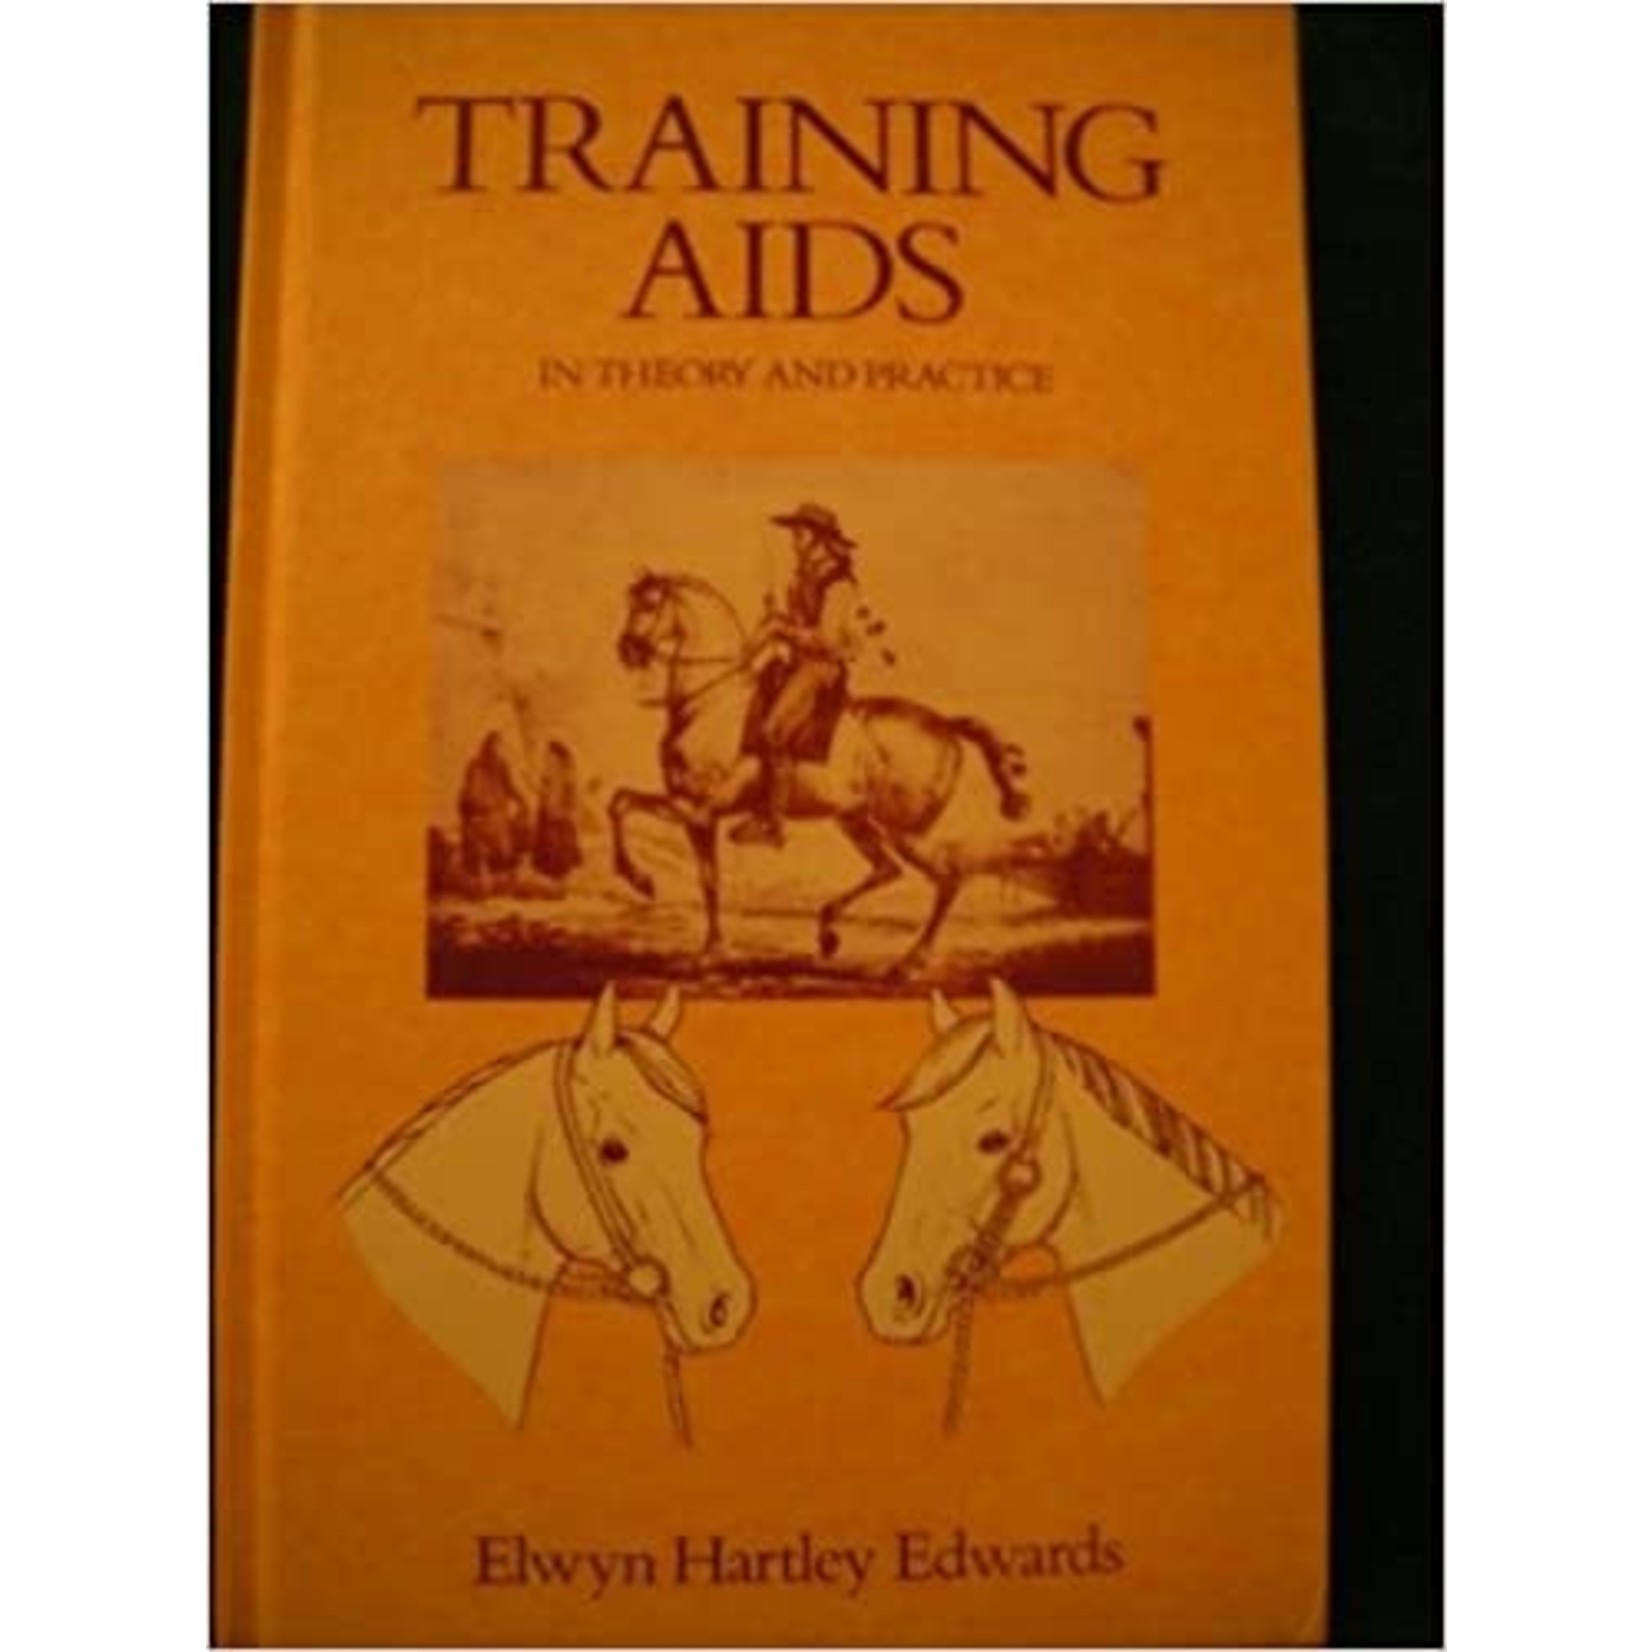 Training Aids - In Theory and Practice